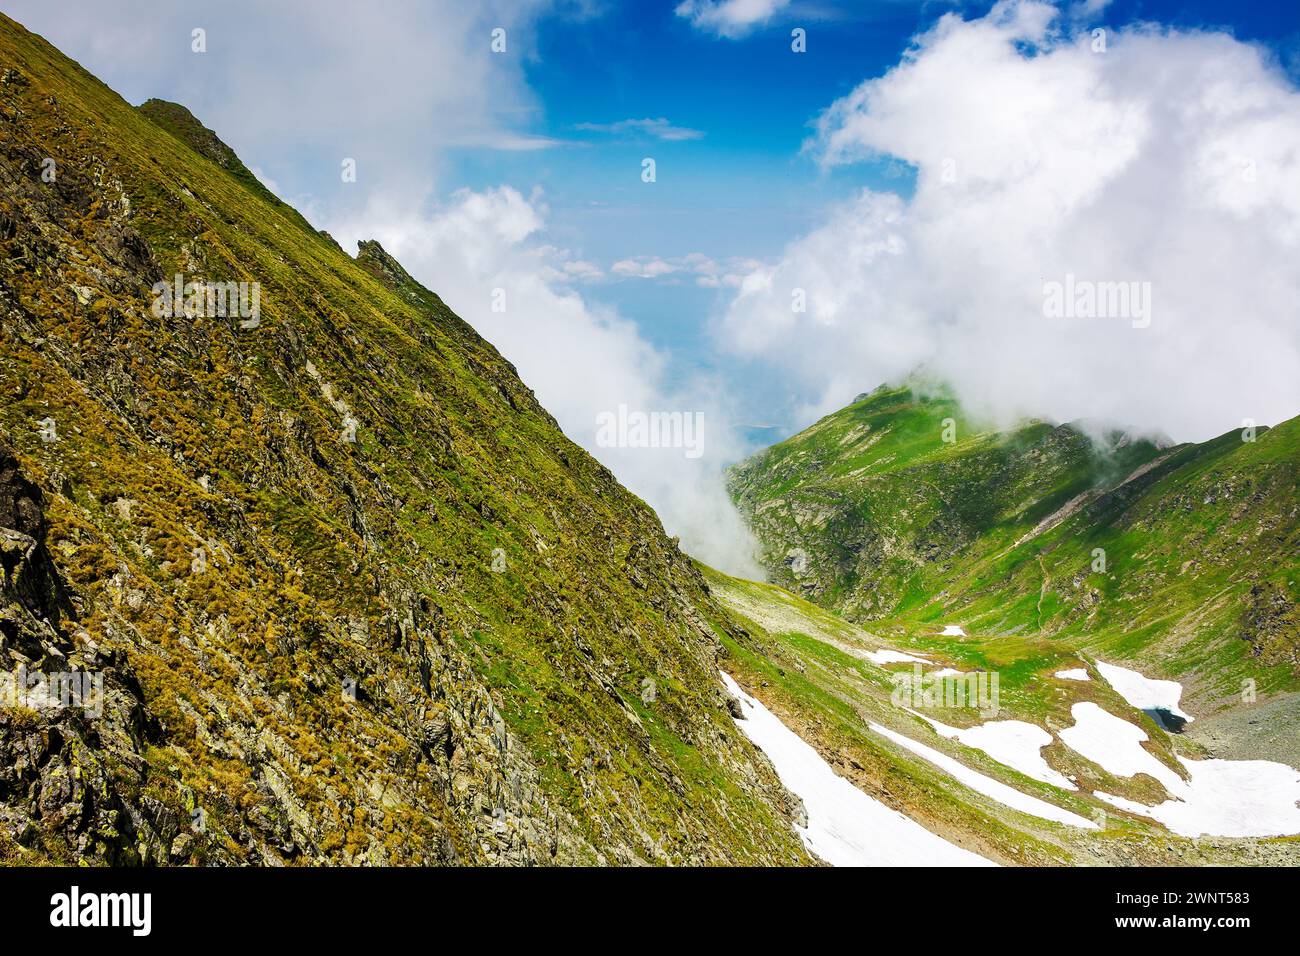 landscape of transylvania alps in summer. spots of snow among grass on the rocky hills of fagaras range beneath a sky with clouds. popular travel dest Stock Photo